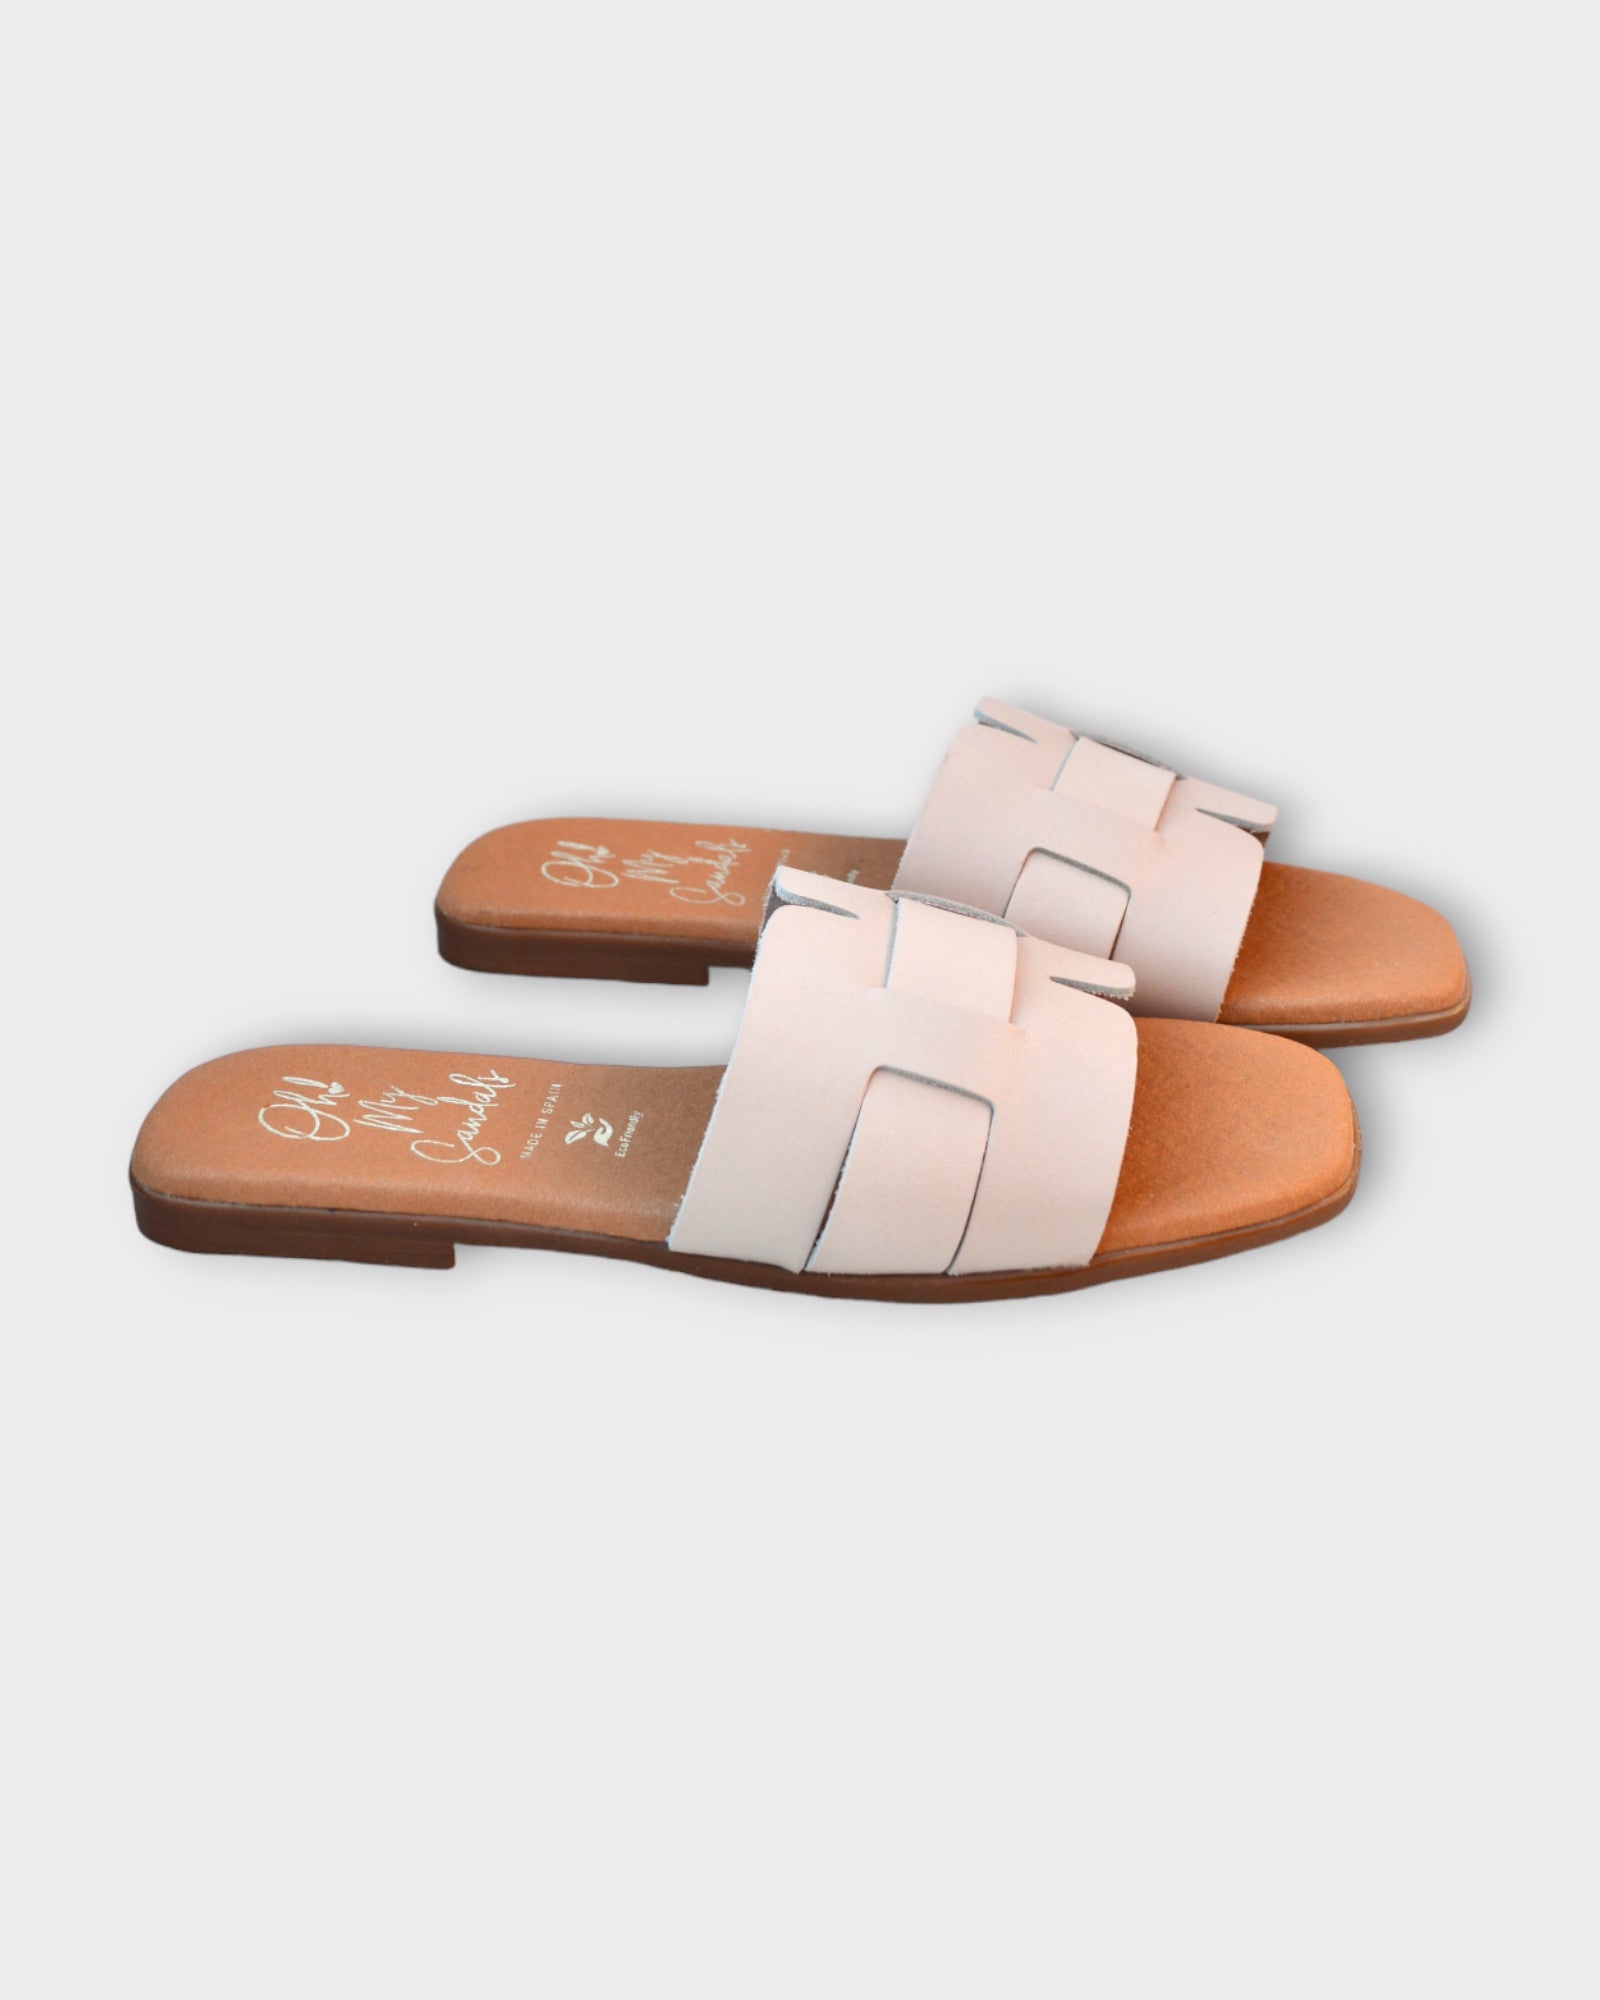 Oh My Sandals 5150